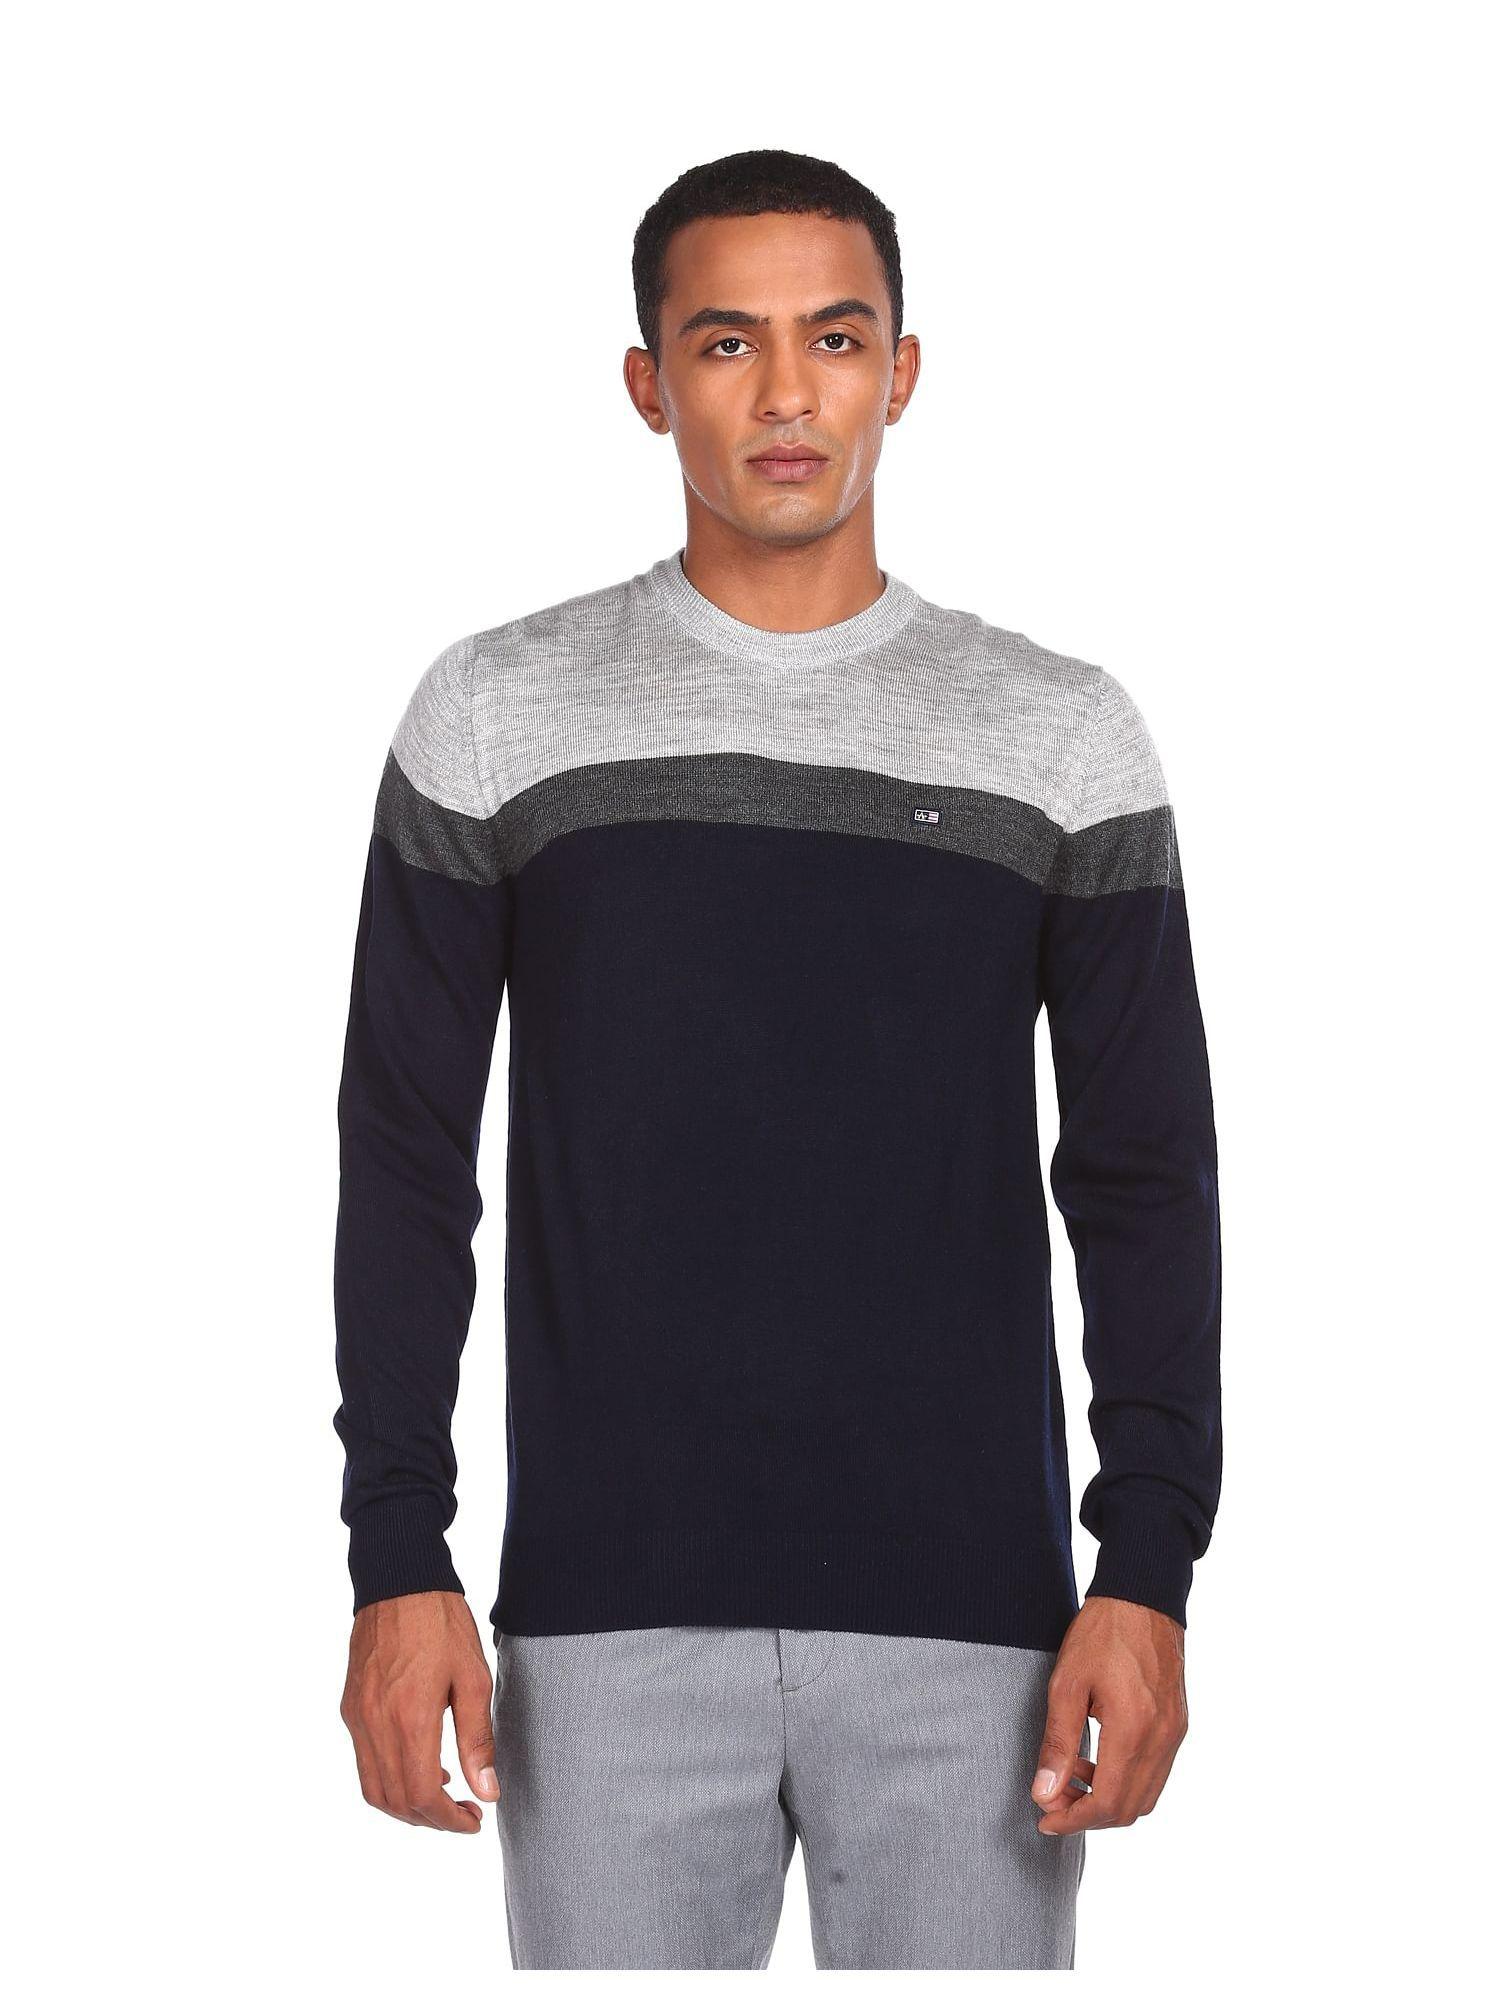 sports men navy and grey crew neck color block sweater